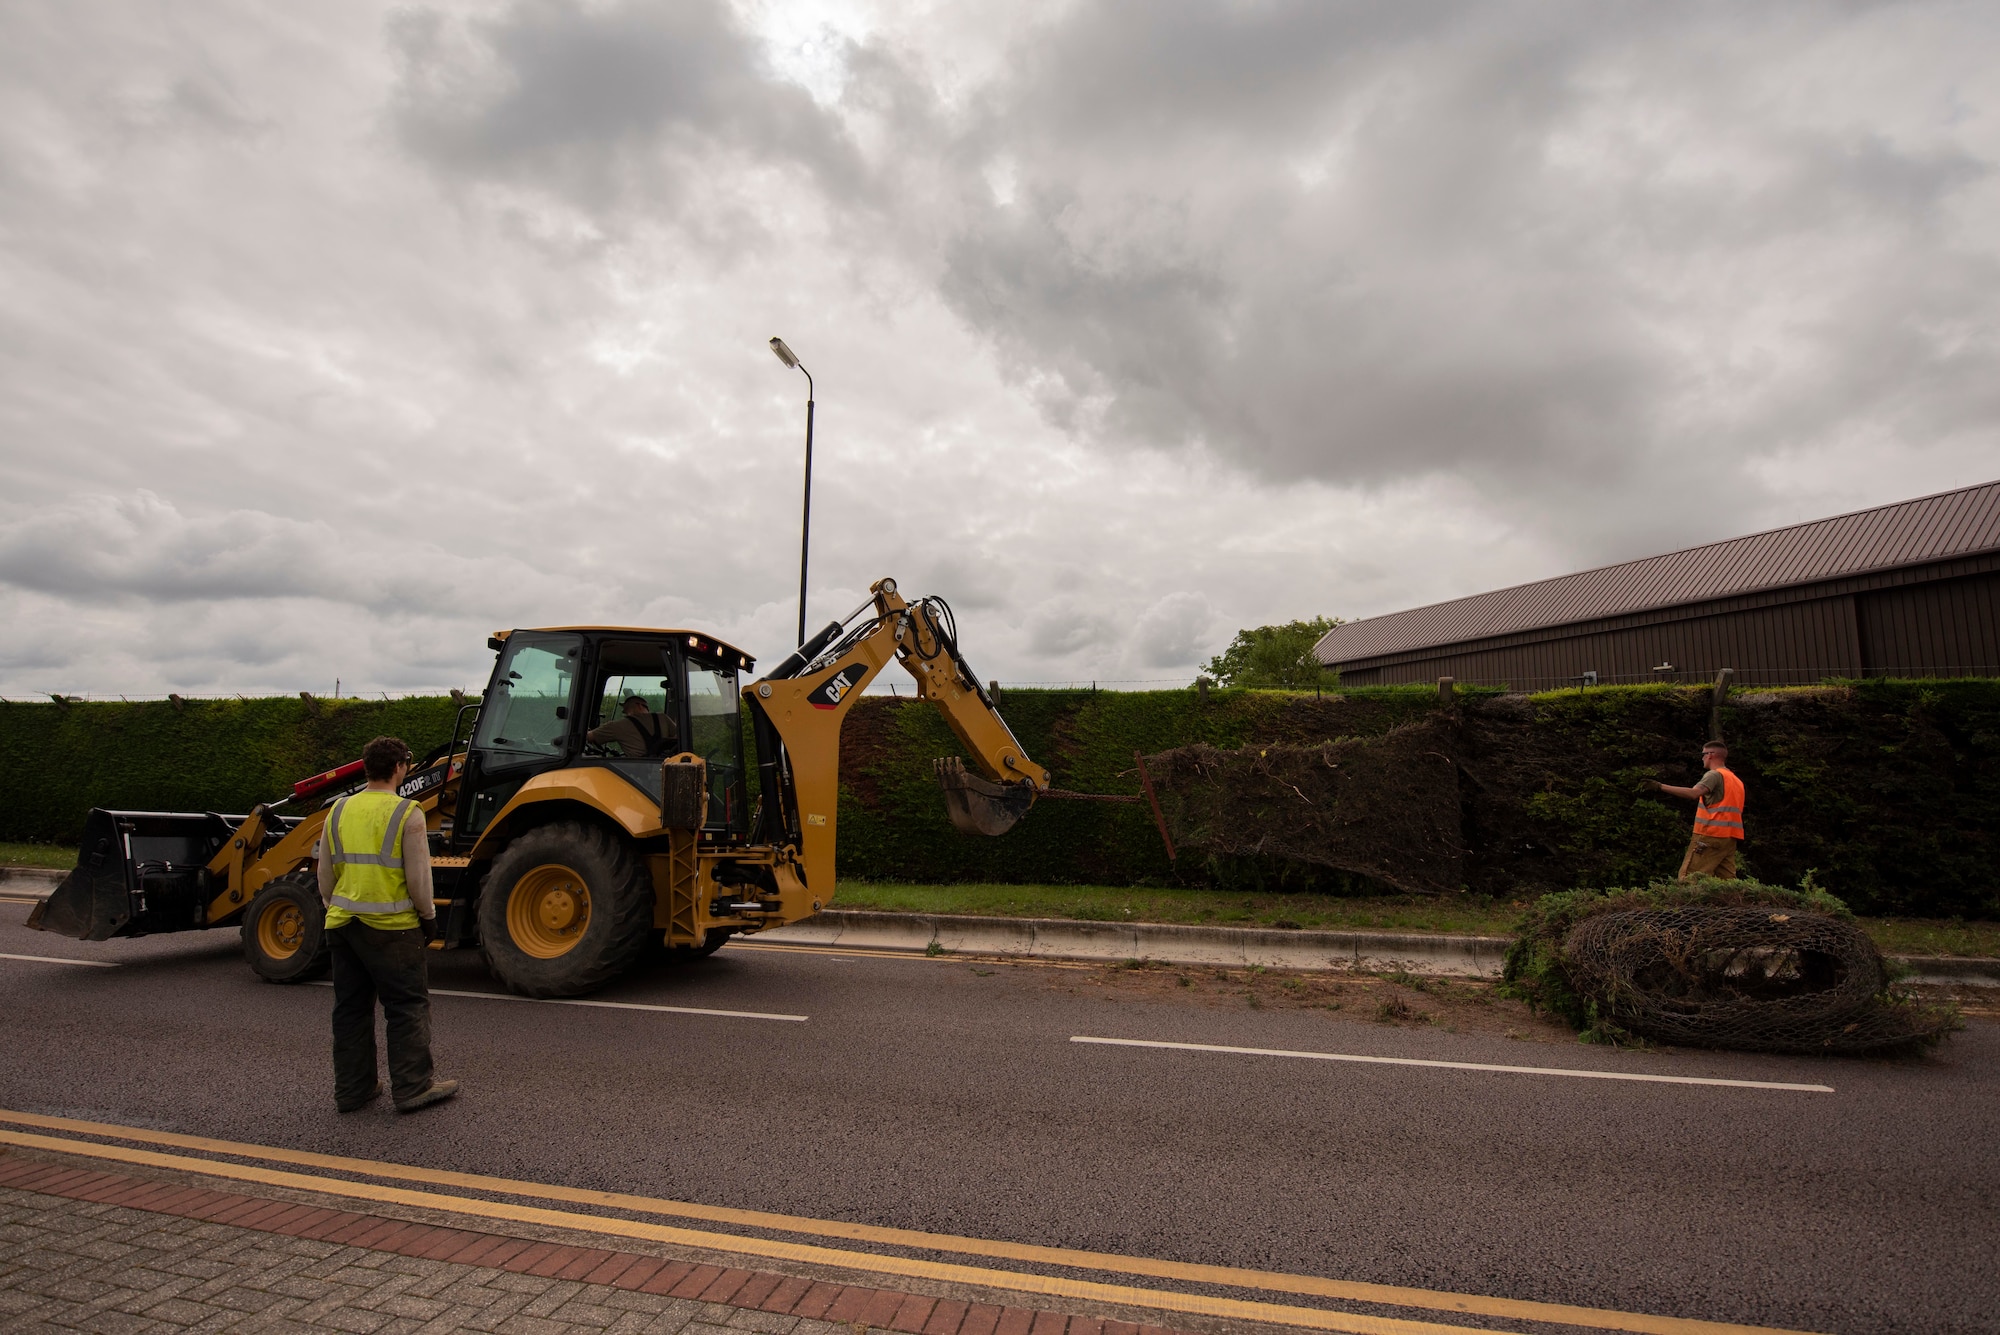 Airmen with the 100th Civil Engineer Squadron Pavement and Construction Equipment Section, remove hedge fencing along Lincoln Road at RAF Mildenhall, England, July 13, 2020. The fencing was removed to improve pedestrian access to parking. (U.S. Air Force photo by Airman 1st Class Joseph Barron)